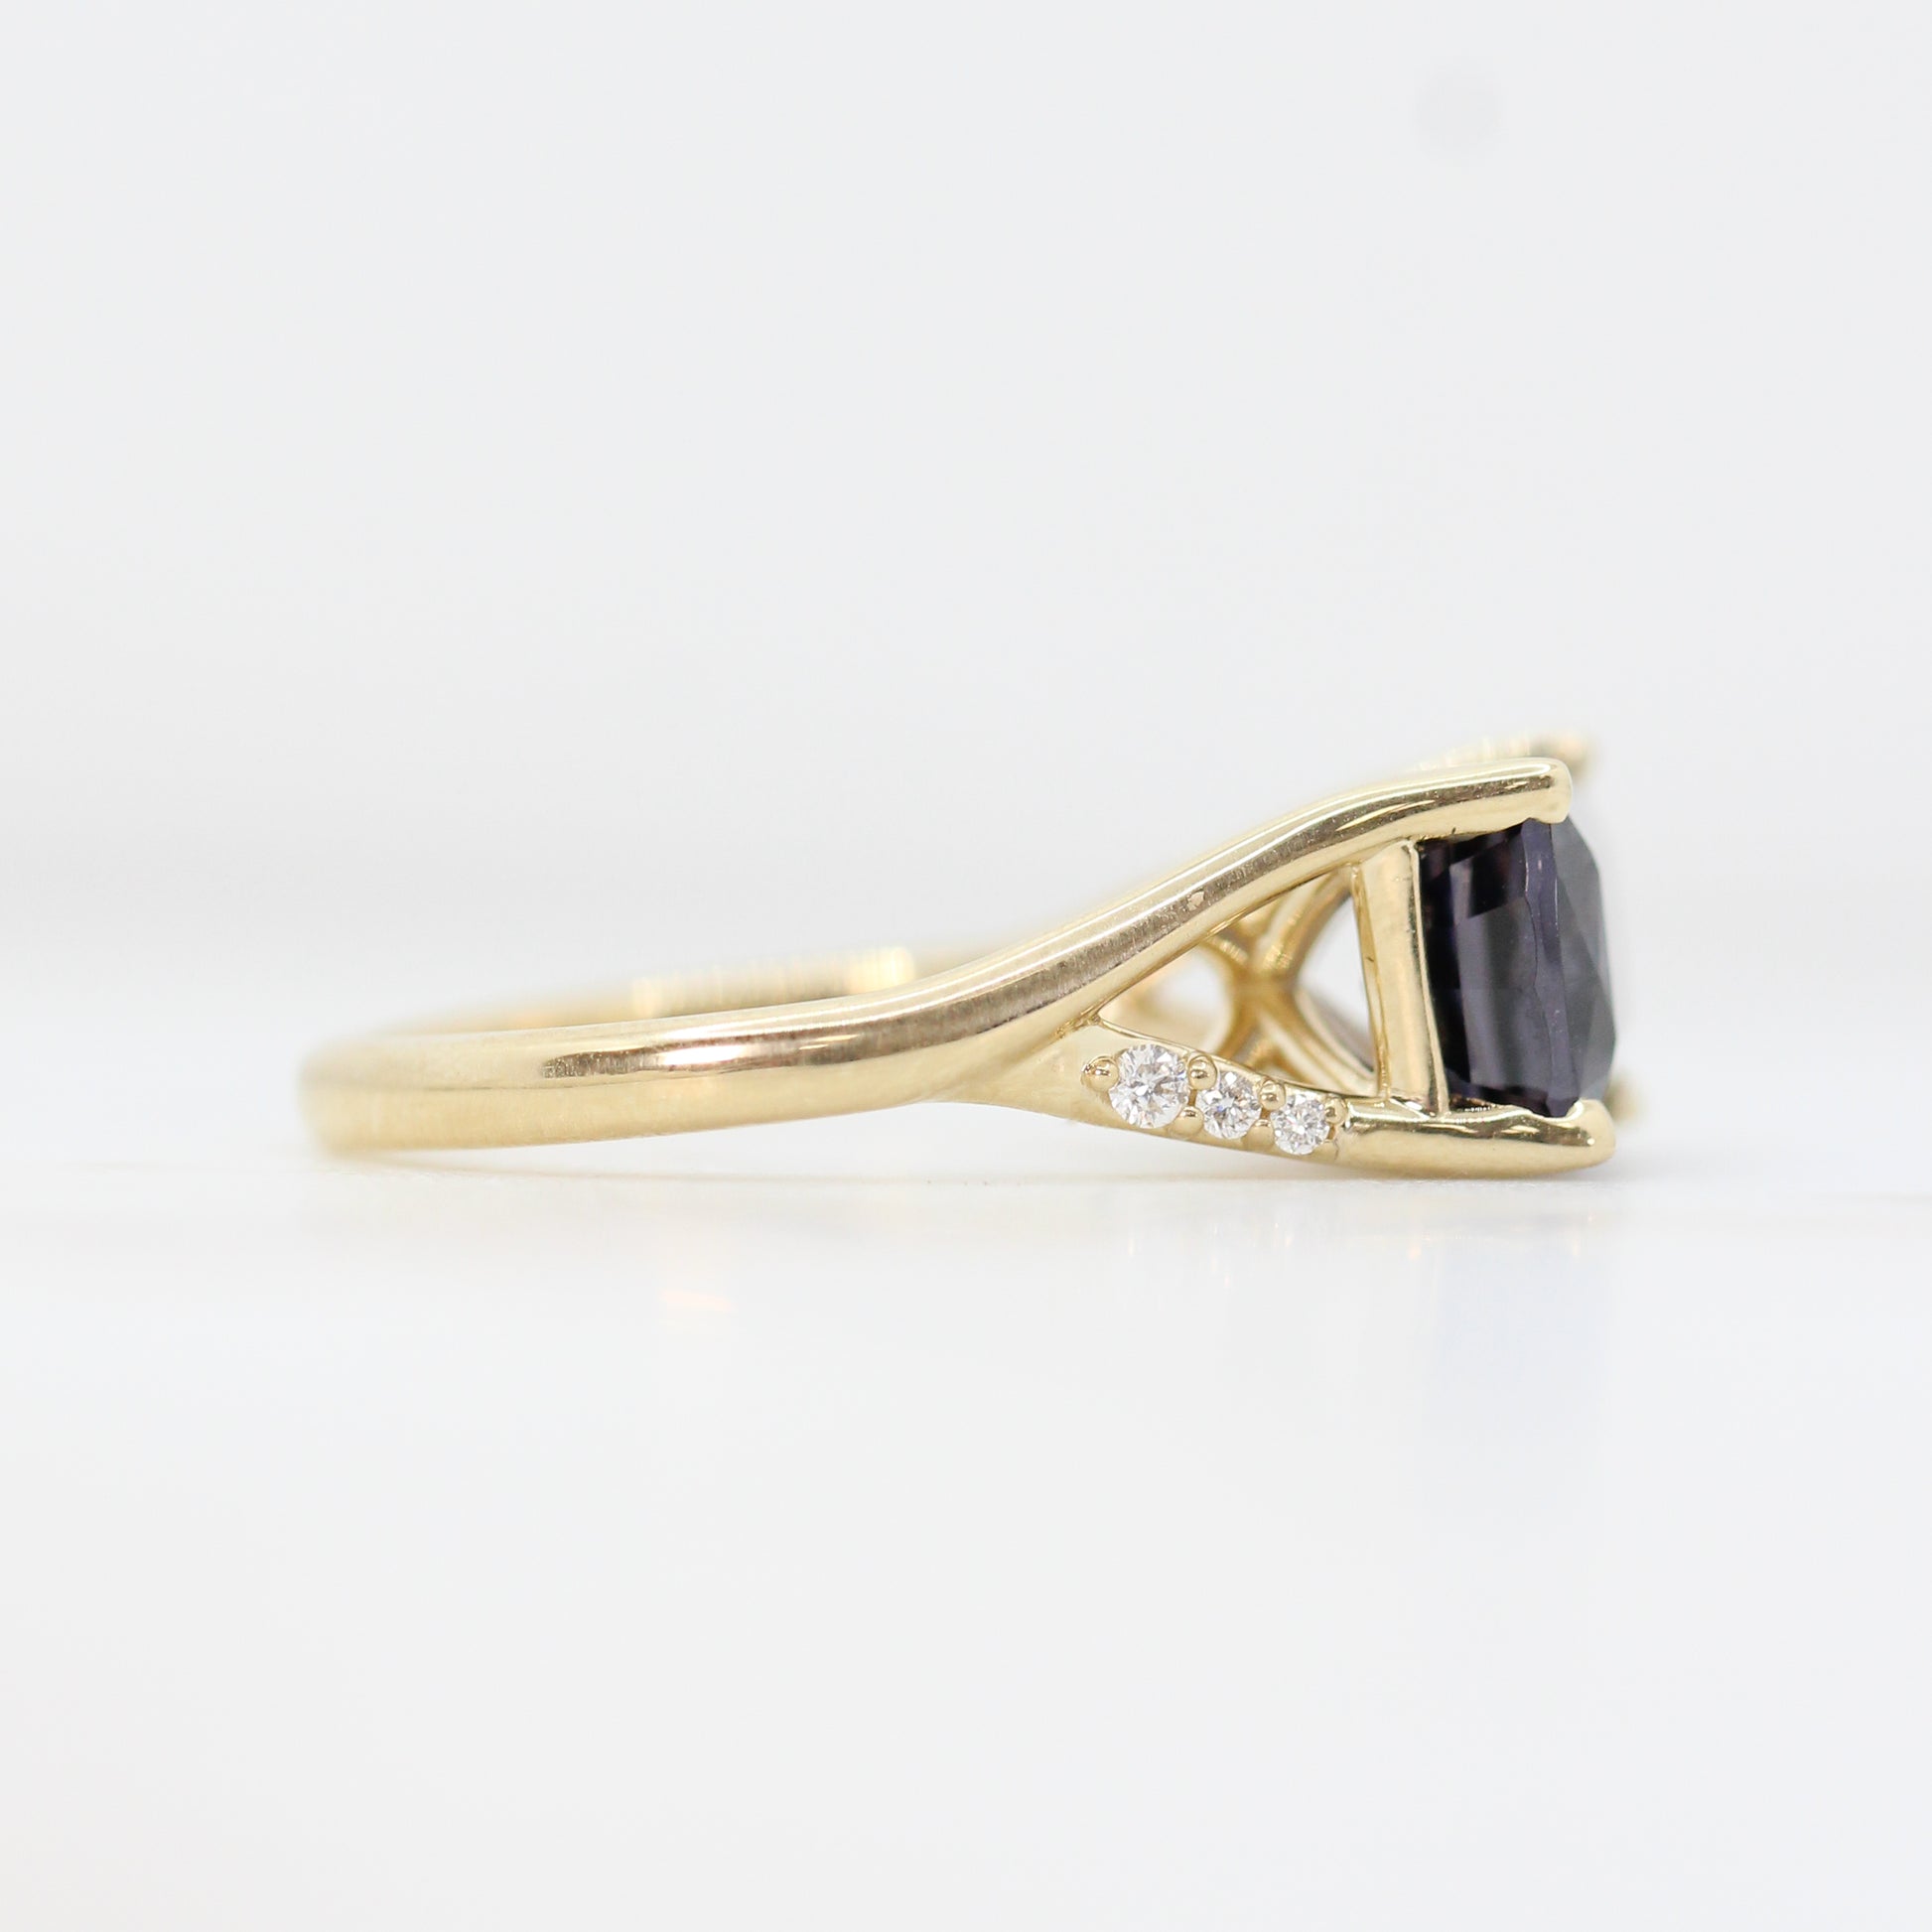 Kennedy Ring with a Carat Spinel and White Diamonds in 14k Yellow Gold - Ready to Size and Ship - Midwinter Co. Alternative Bridal Rings and Modern Fine Jewelry